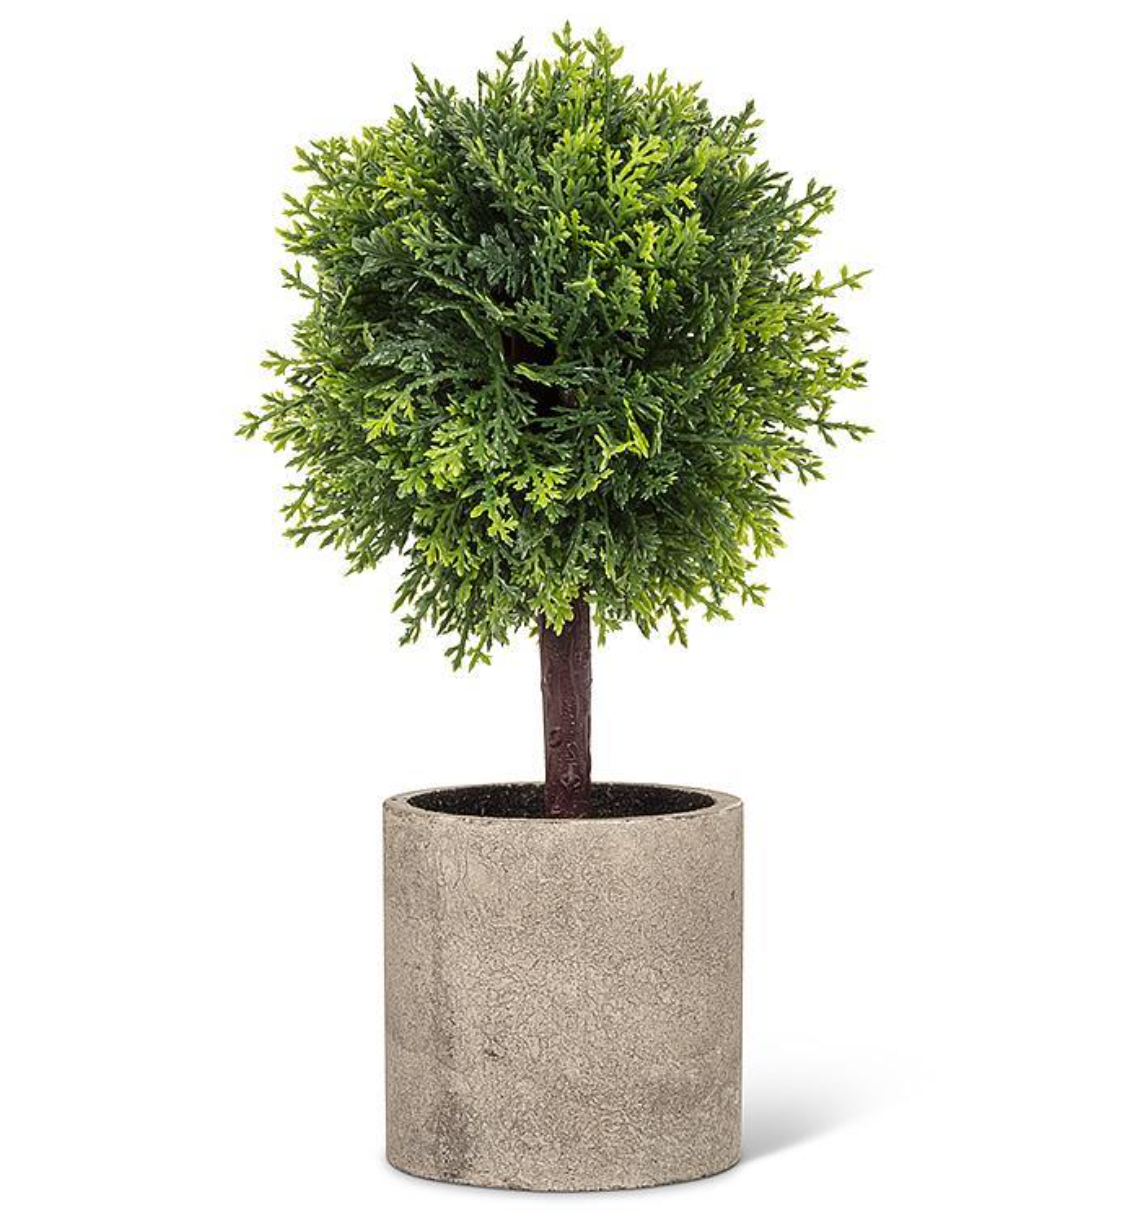 Green Conifer Topiary In Pot 9.5"H